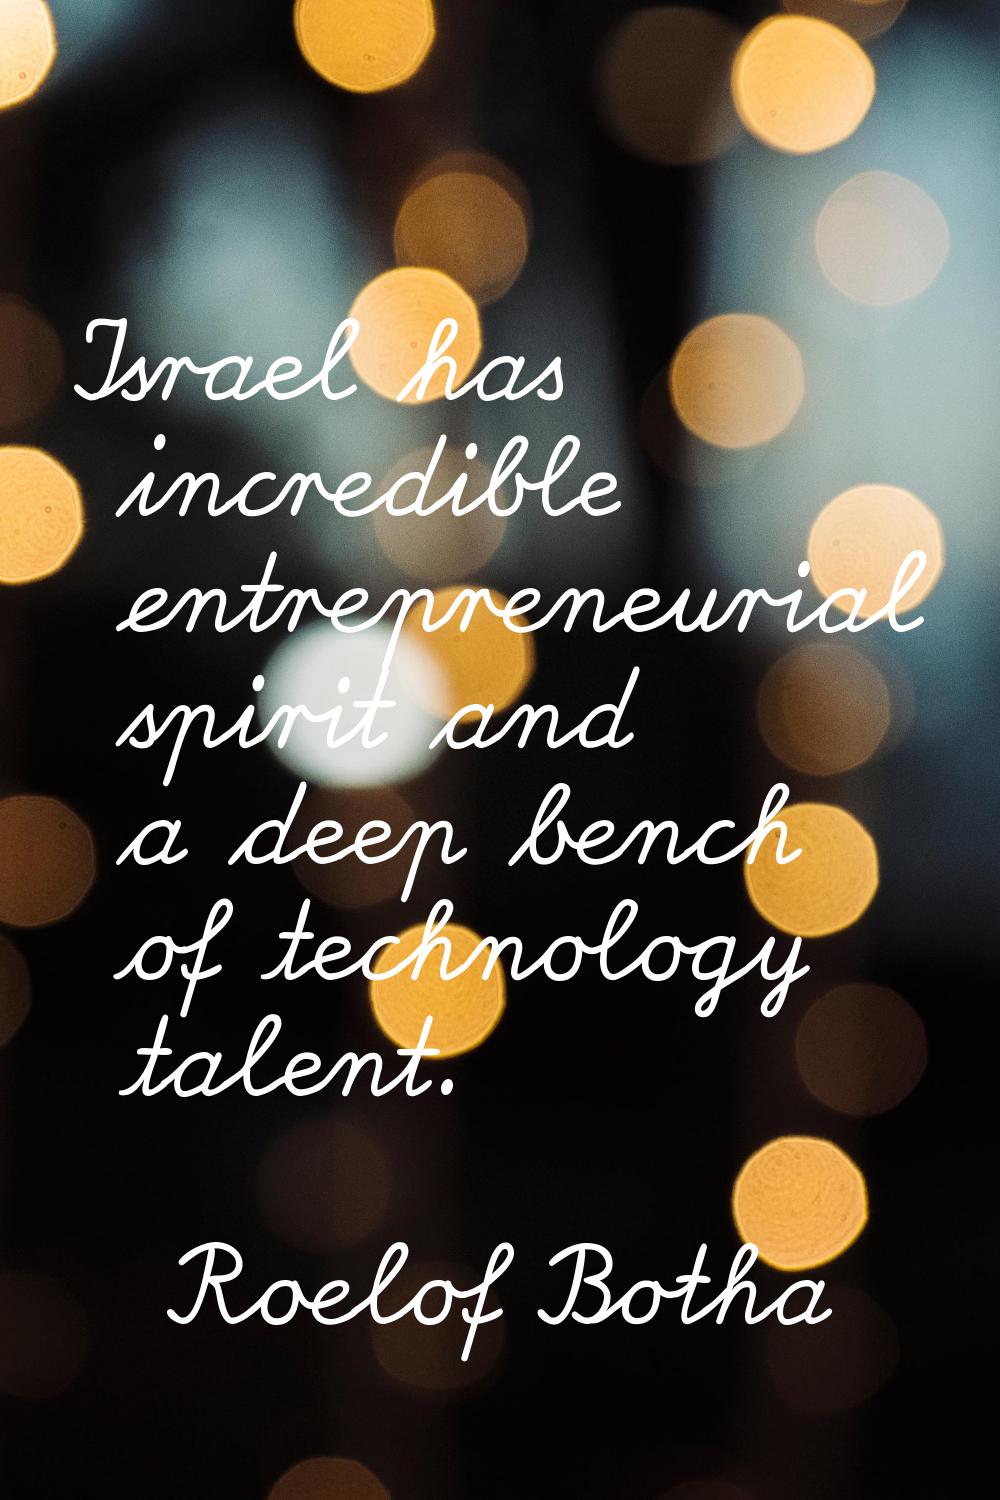 Israel has incredible entrepreneurial spirit and a deep bench of technology talent.